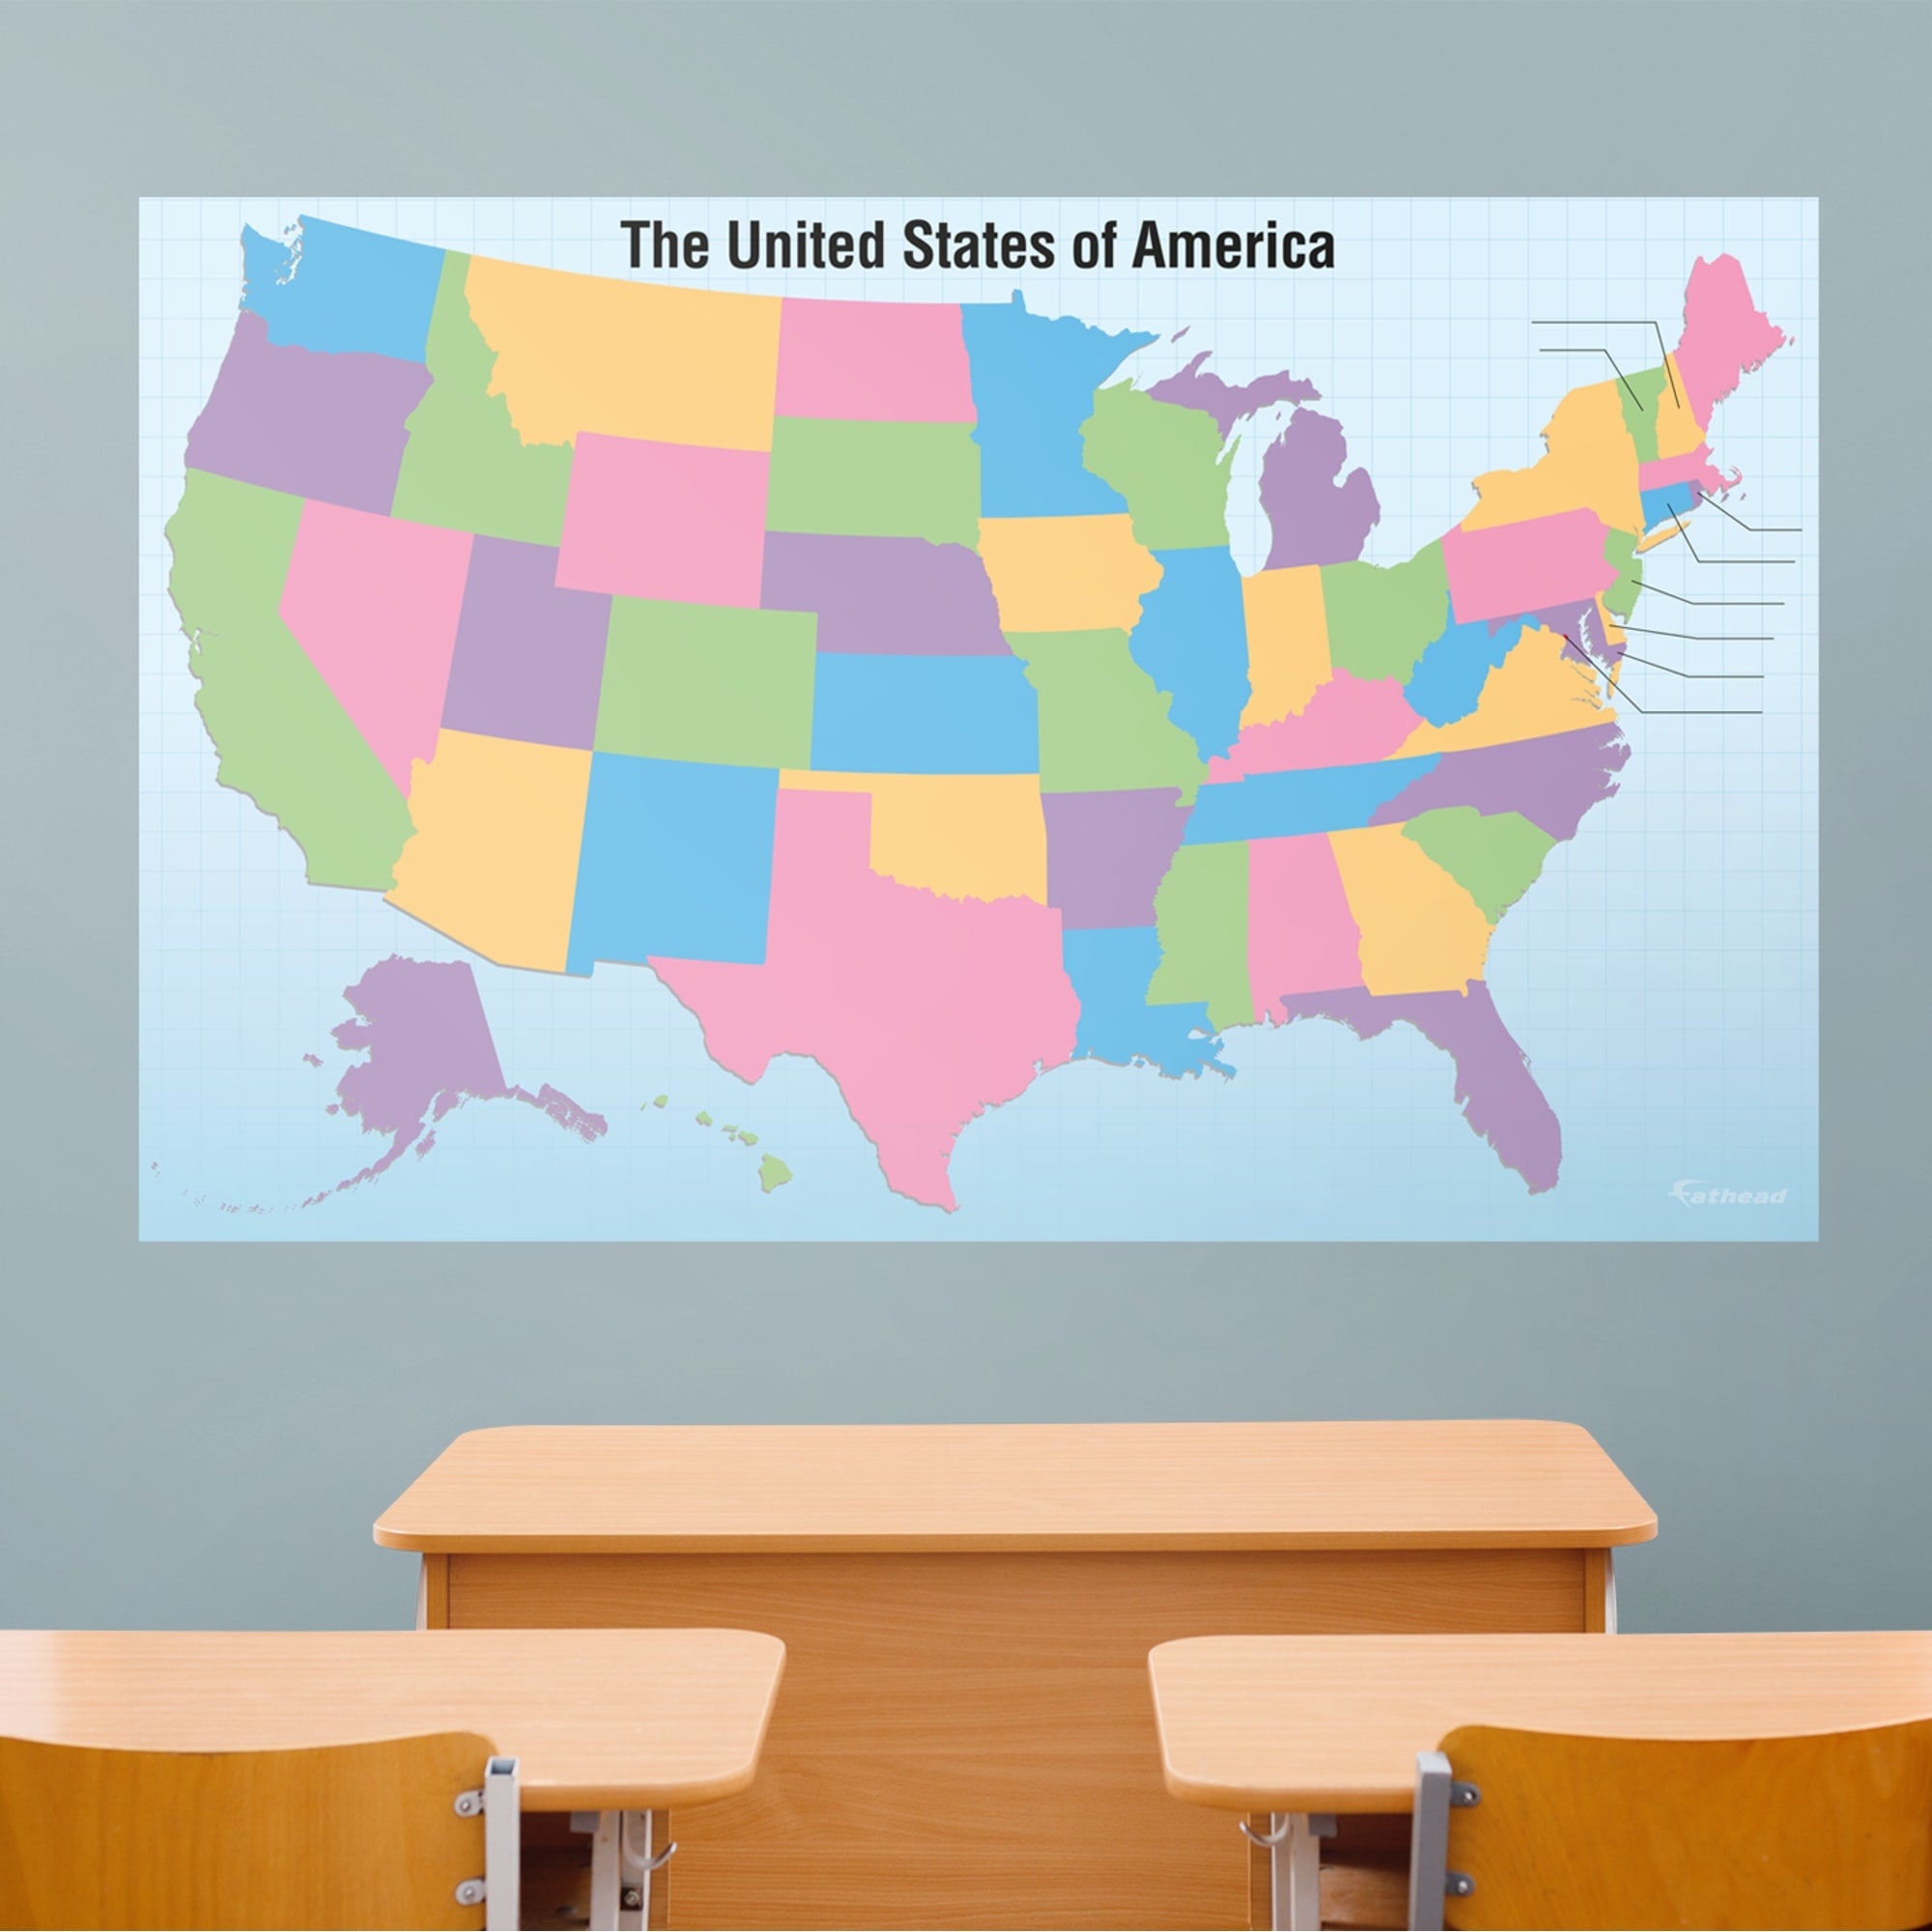 USA Map With Removable State Names - Removable Dry Erase Vinyl Decal 81.0"W x 51.0"H by Fathead